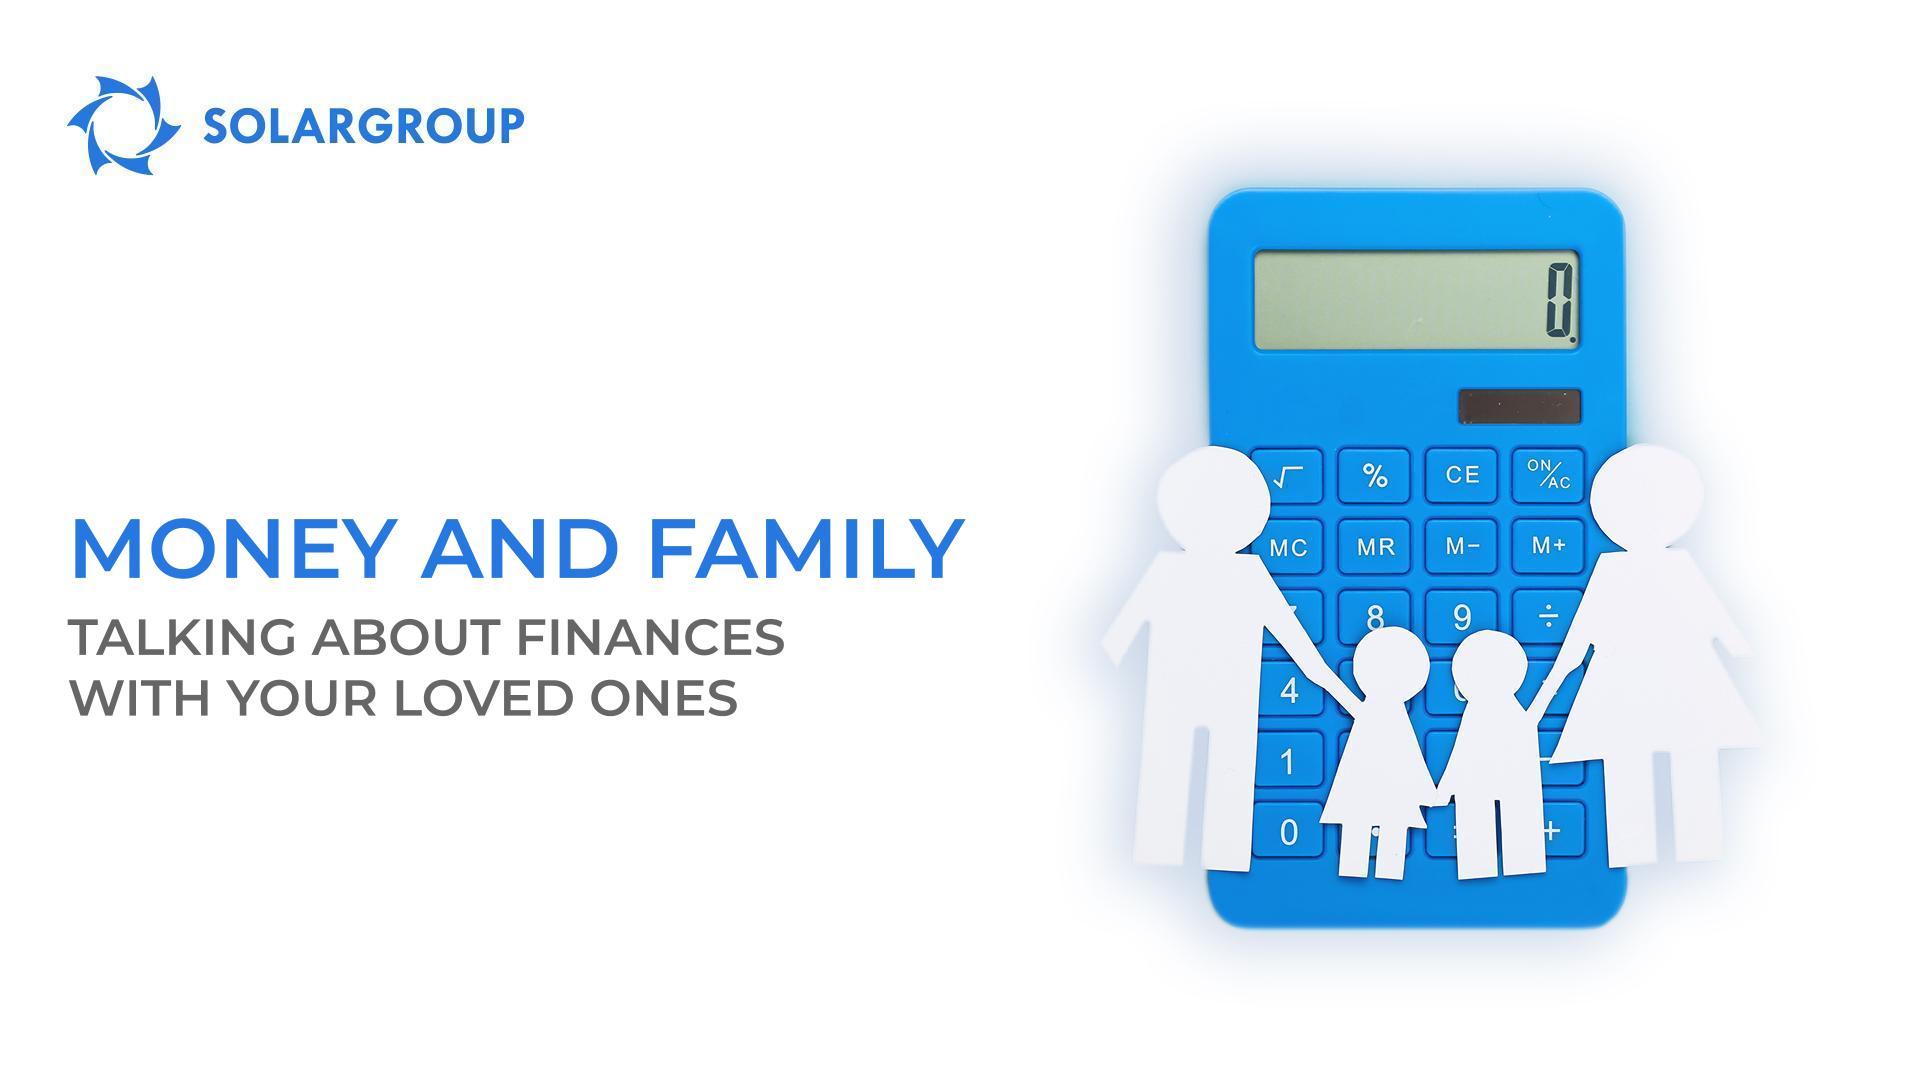 Money and family: talking about finances with your loved ones